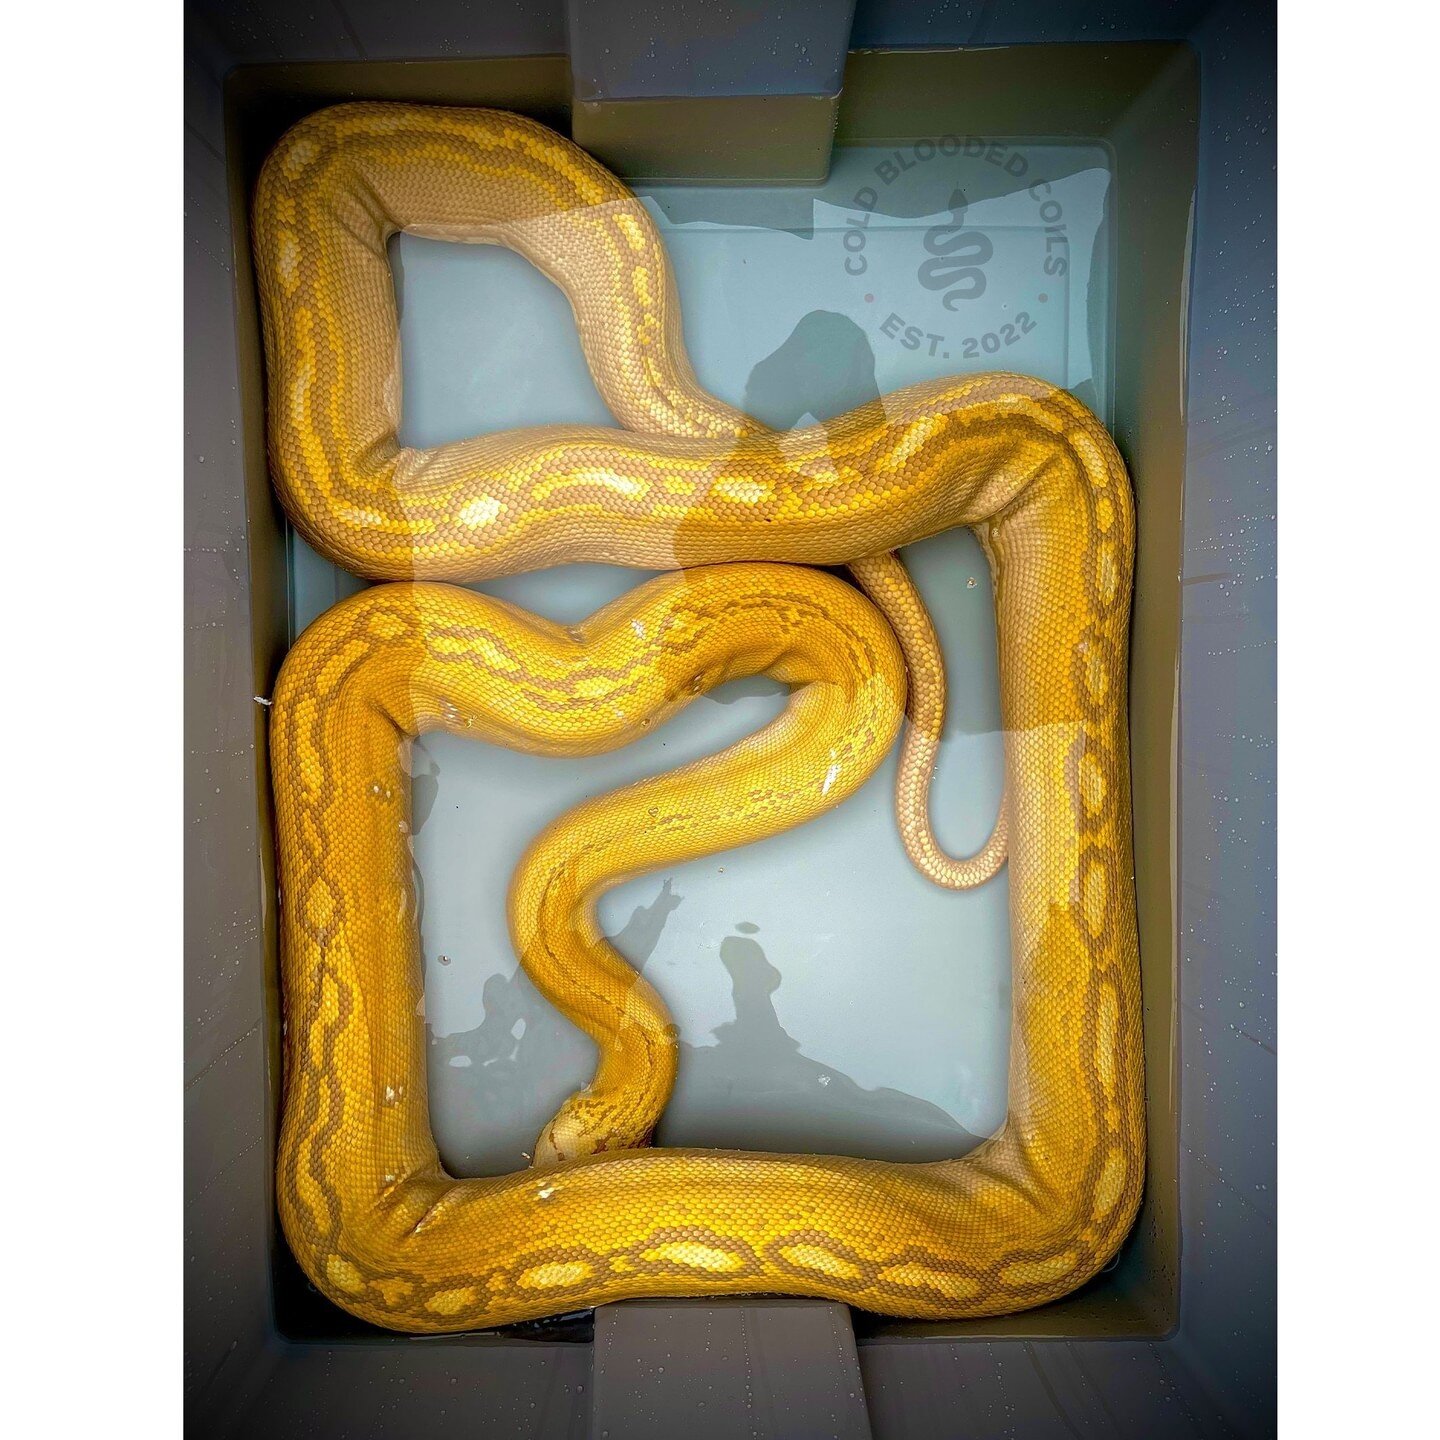 Cold Blooded Coils | Reticulated Python Breeders 
Just our girl Buttercup enjoying some time In the water https://buff.ly/423MHT3